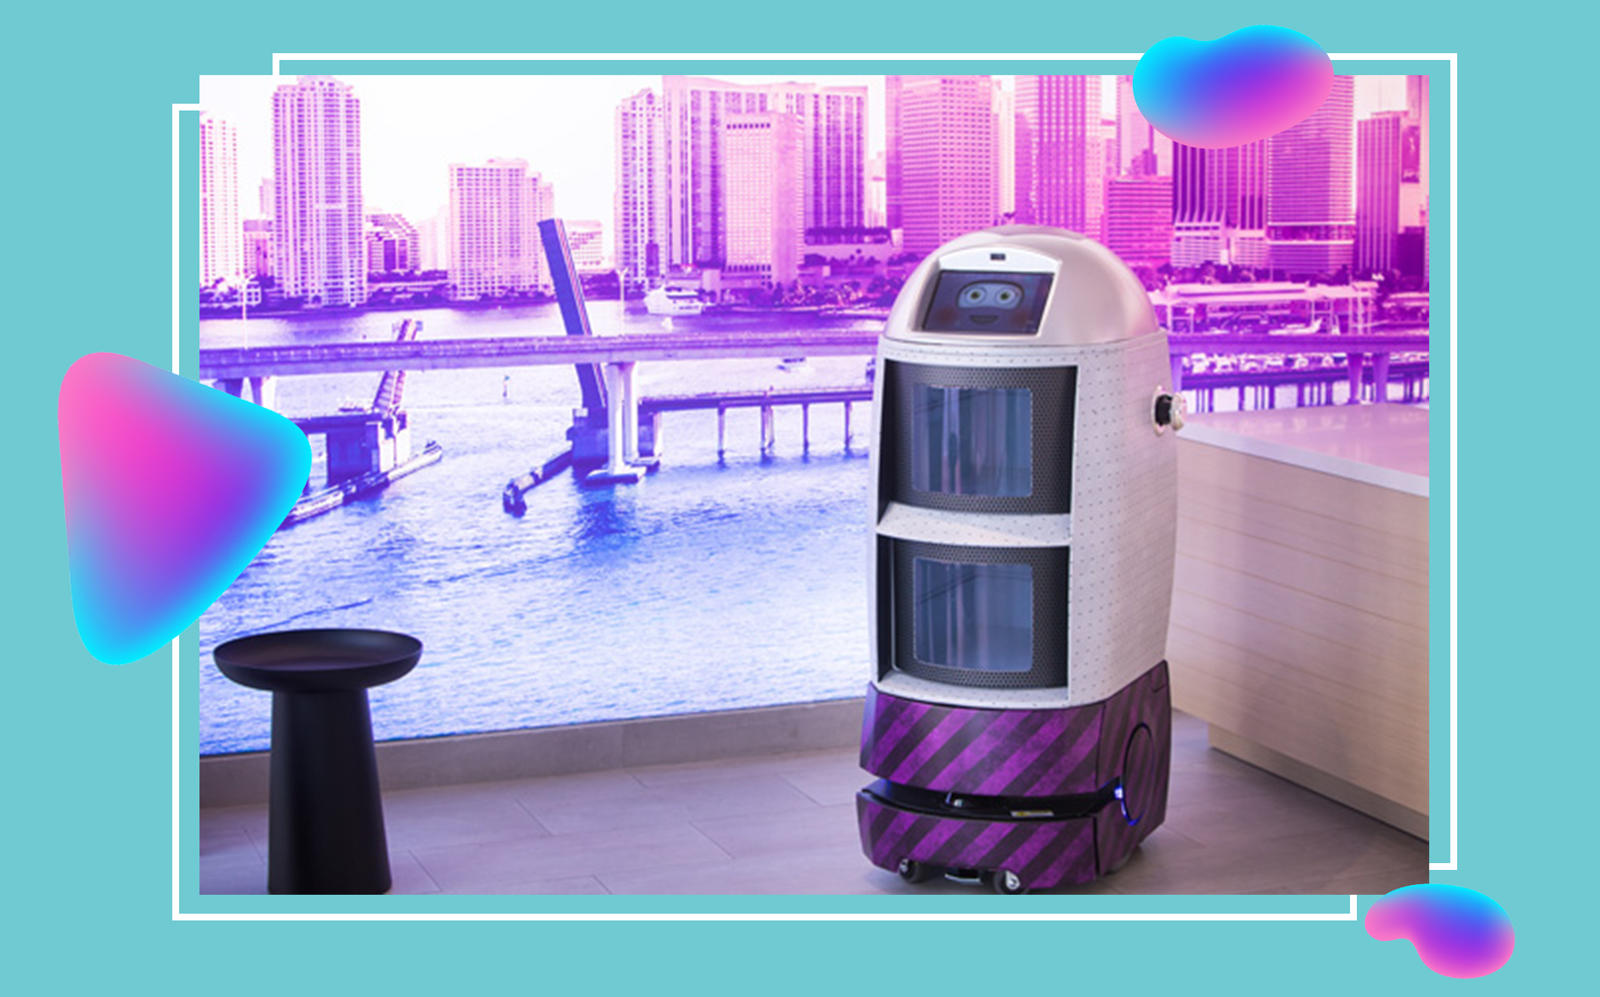 Hoteliers are deploying tons of new tech, such as Yotel's Robot Butler to meet government regulations and ease guests’ fears. (Yotel Pad Miami)